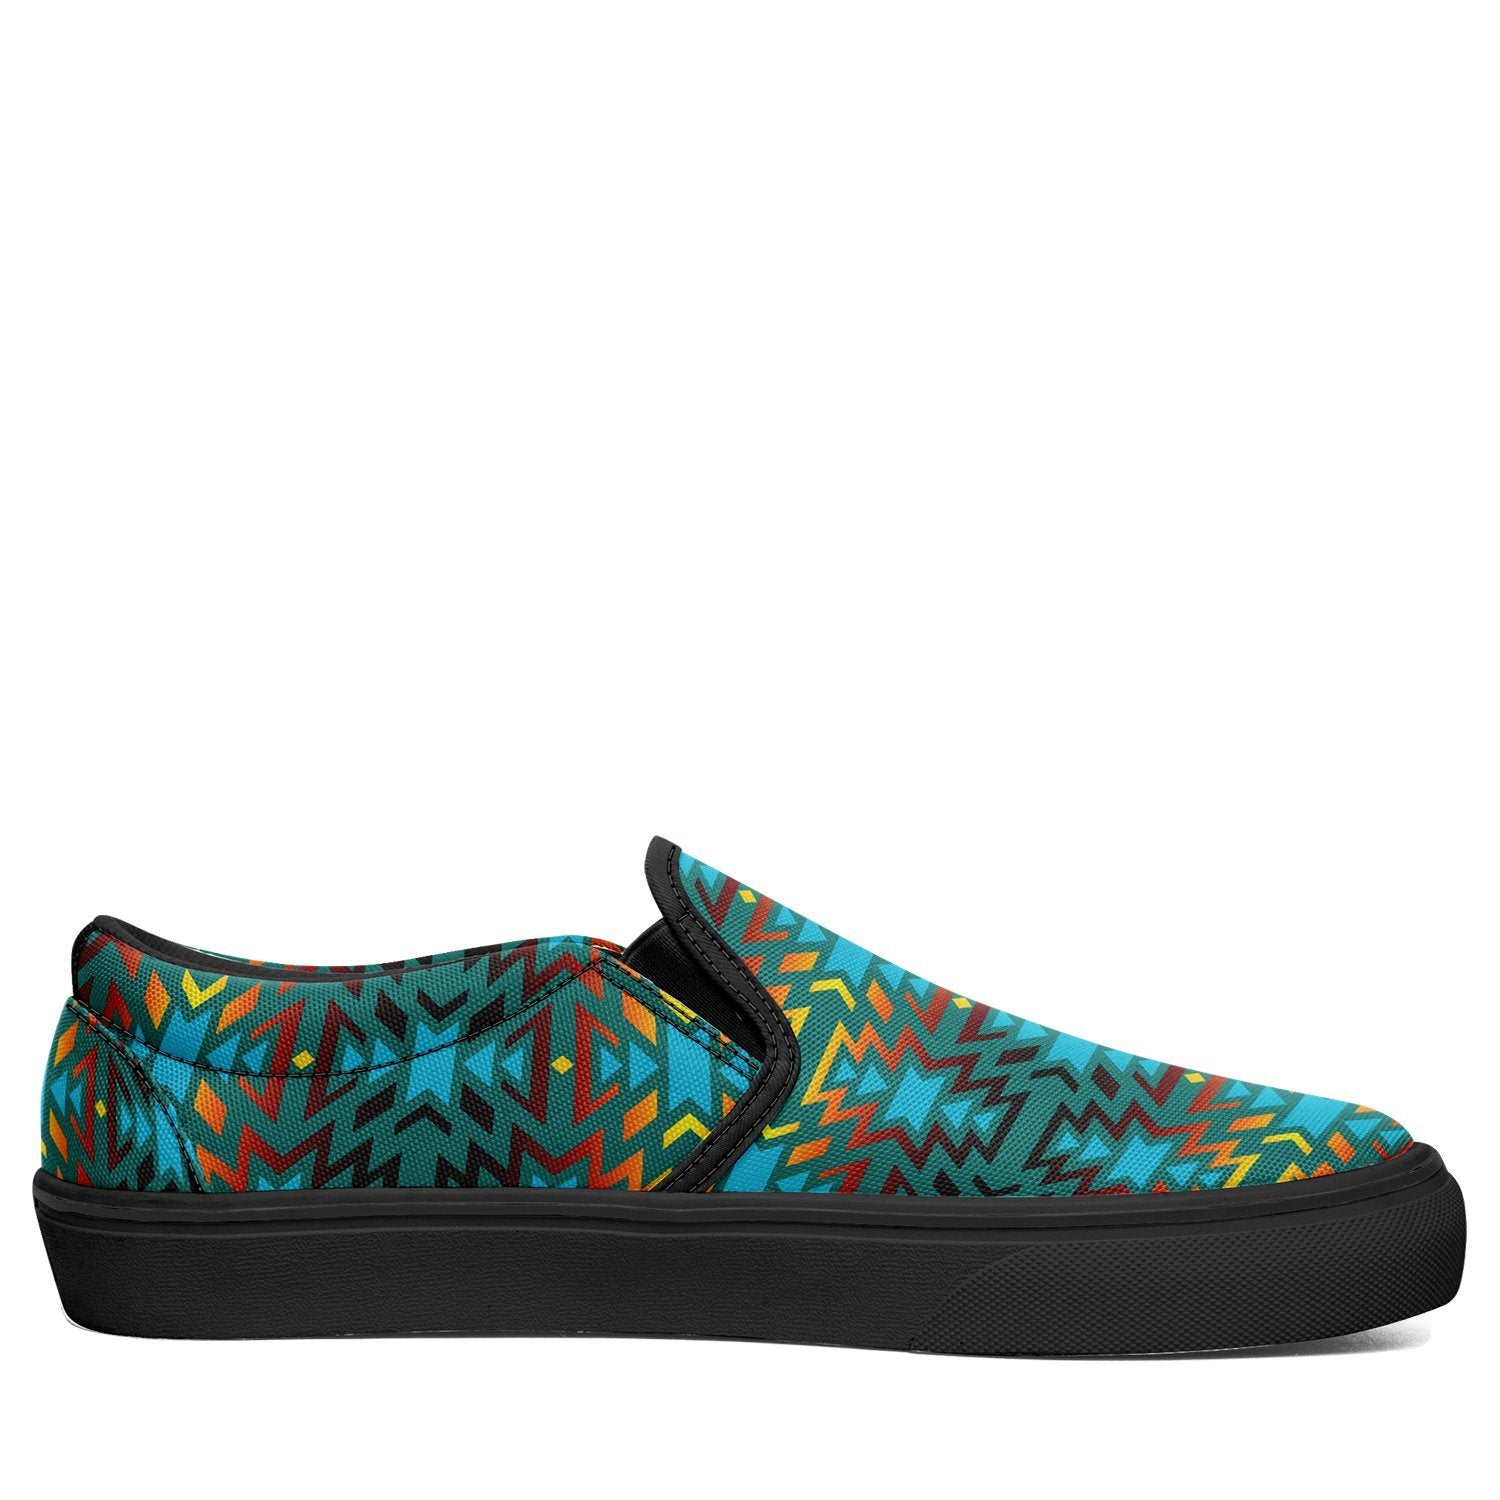 Fire Colors and Turquoise Teal Otoyimm Canvas Slip On Shoes 49 Dzine 